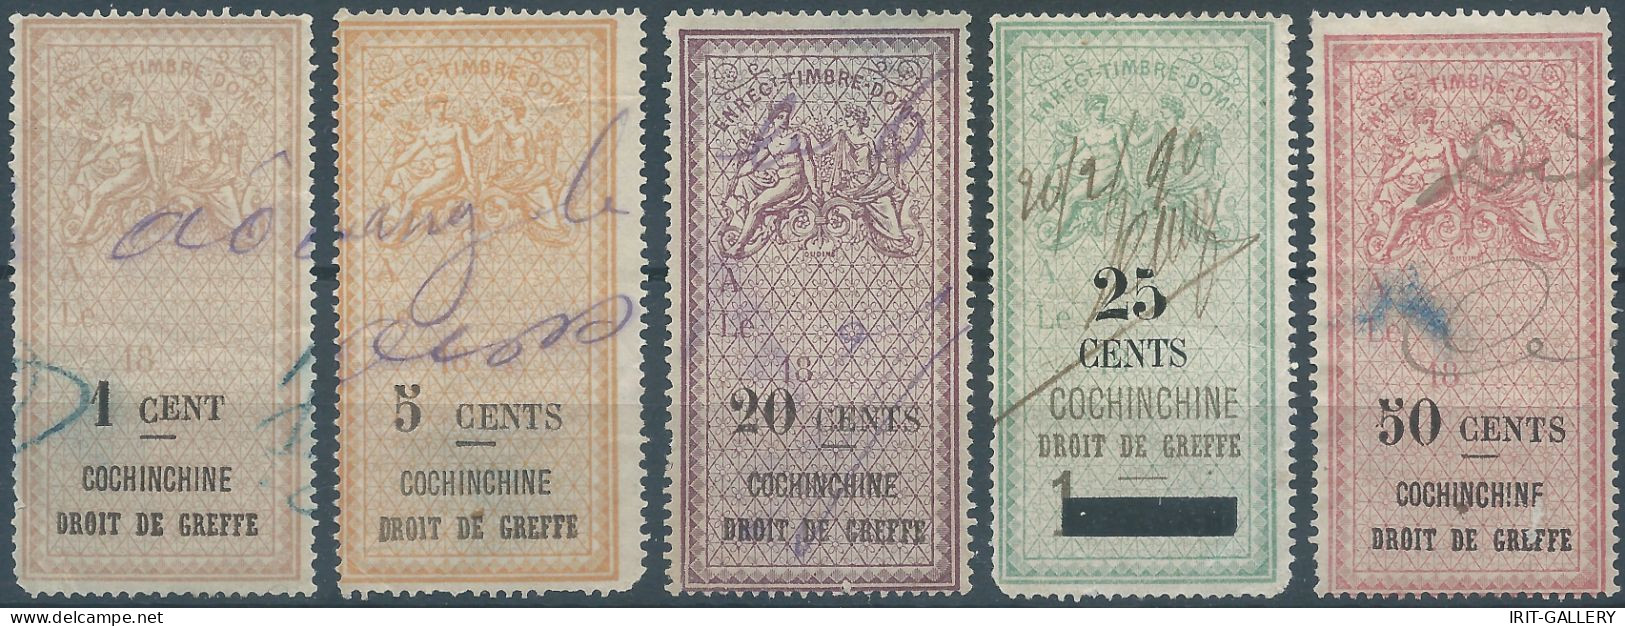 FRANCE,Cochinchine , Revenue Stamp Tax Fiscal DROIT DE GREFFE,1c-5c-20c-25c-50cents,Used - Very Old - Usados